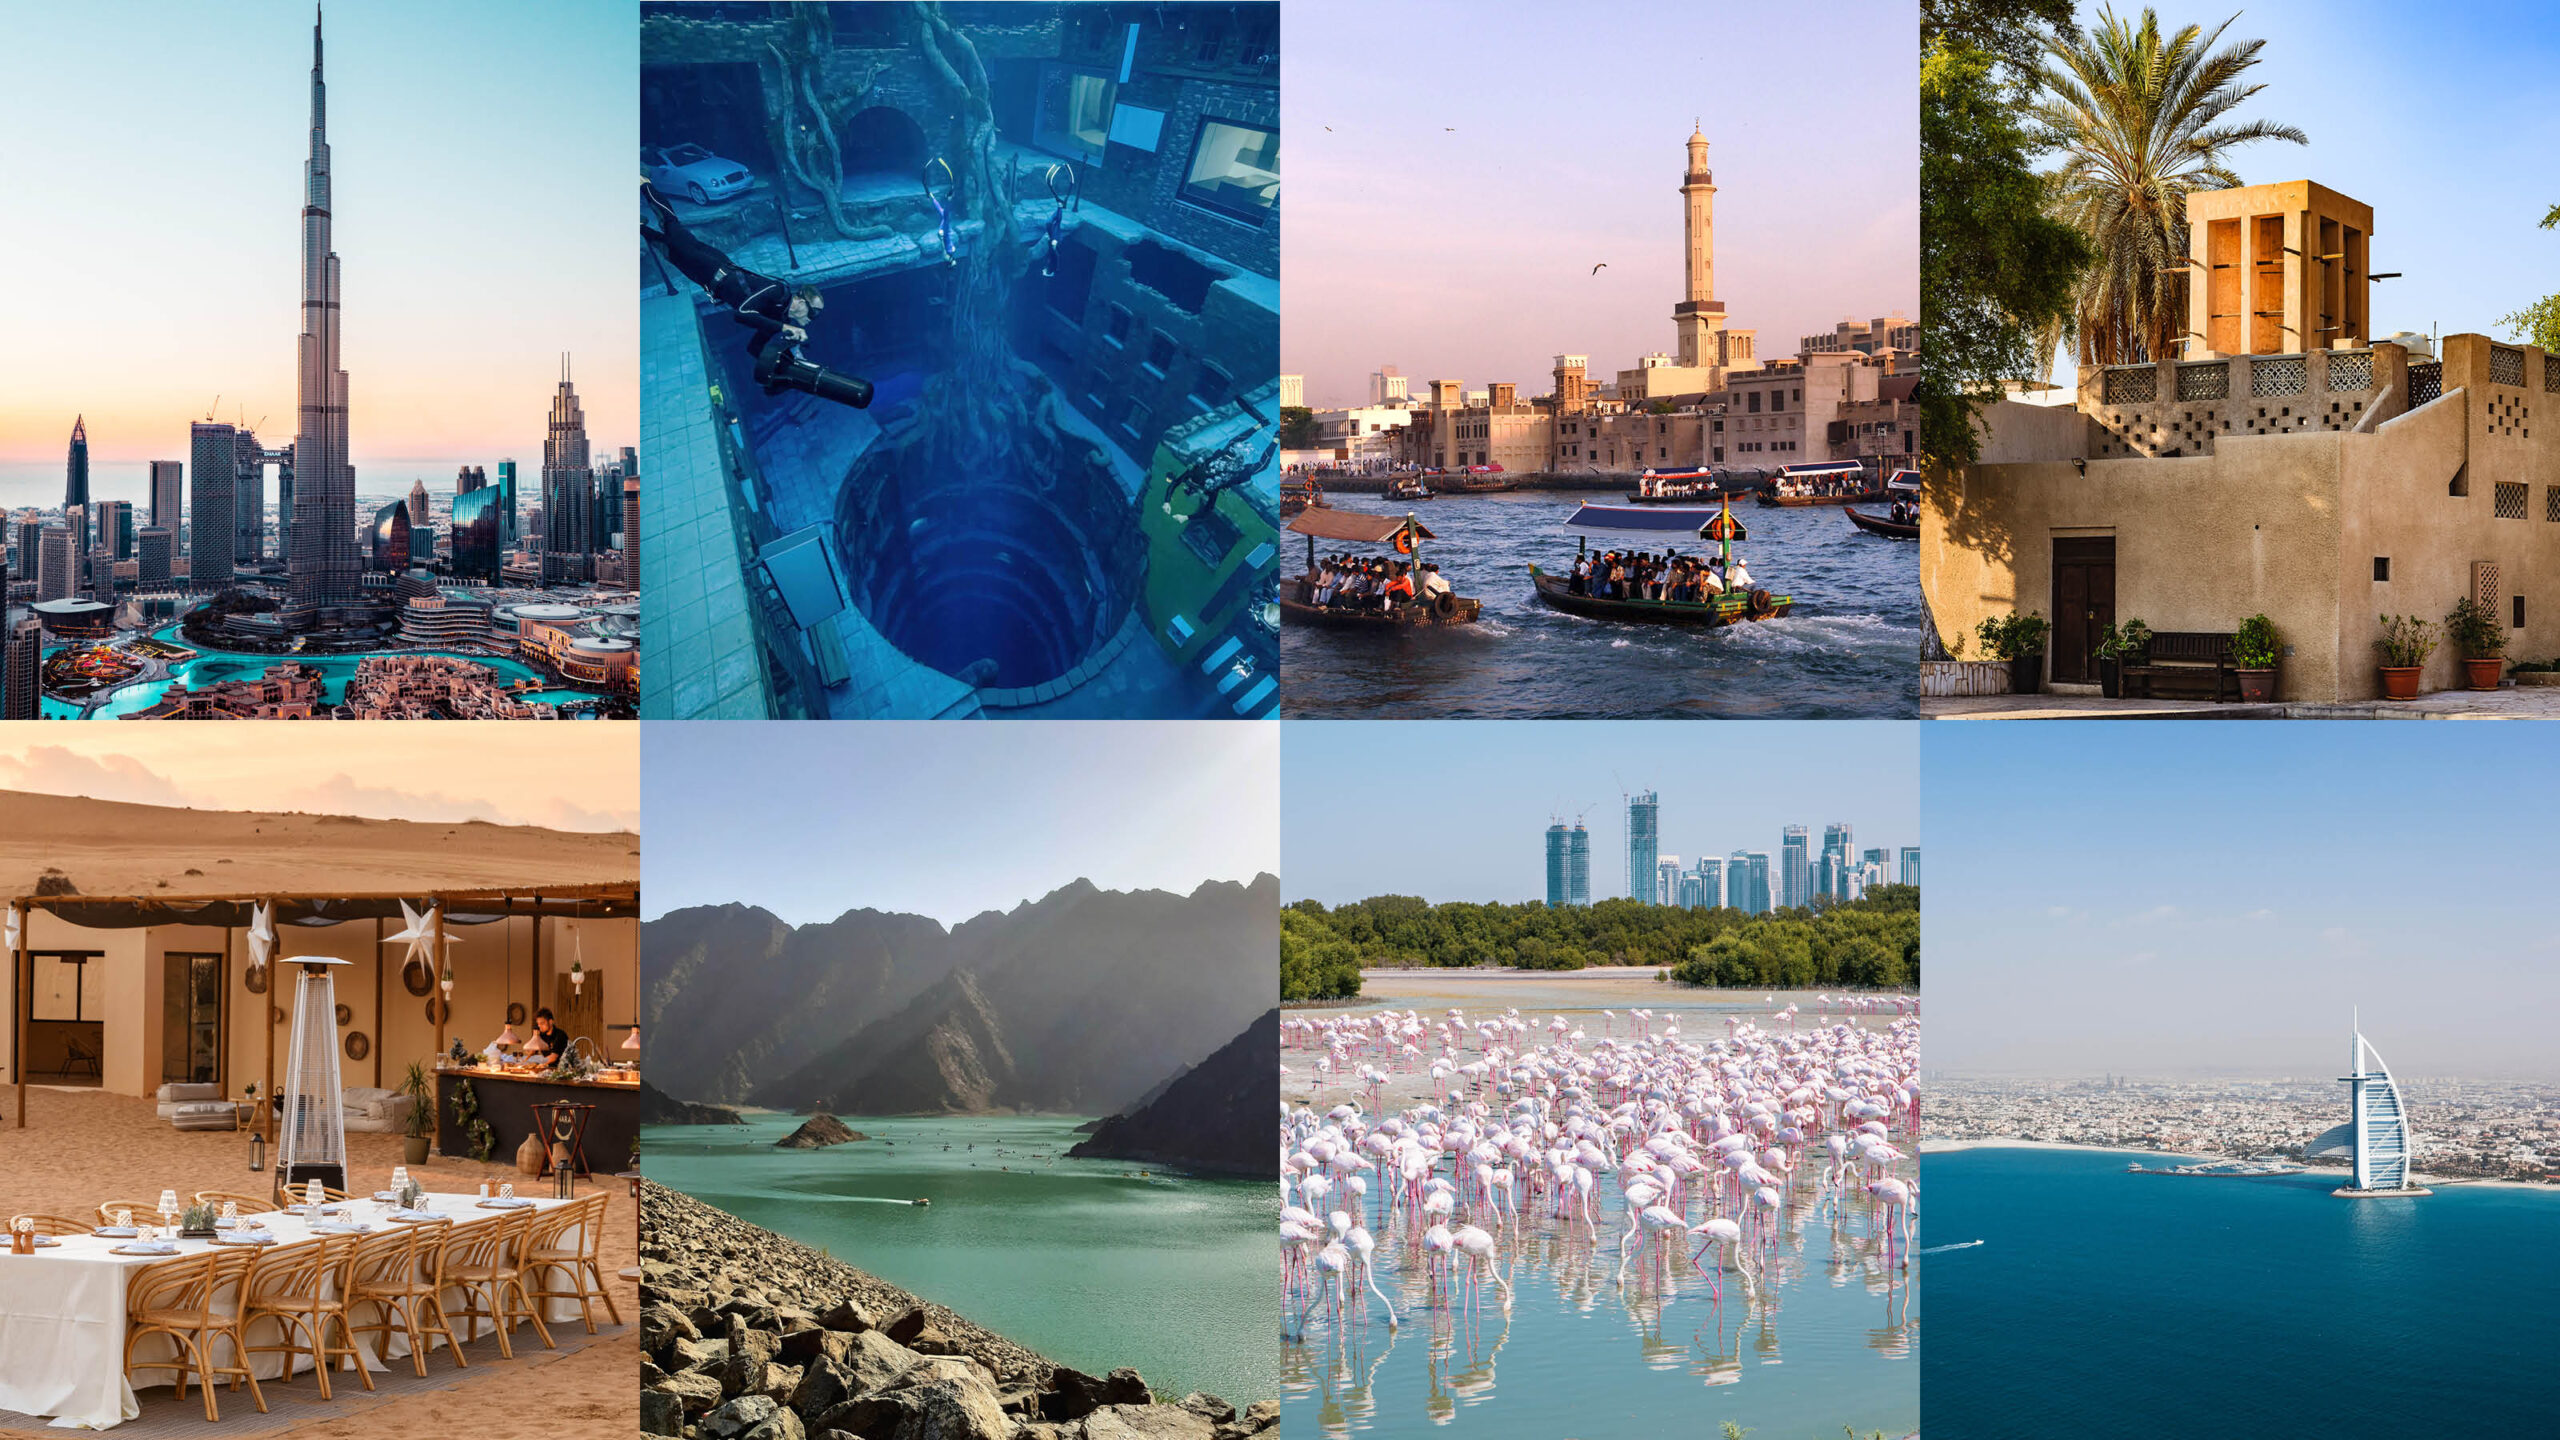 Things To Do While In Dubai